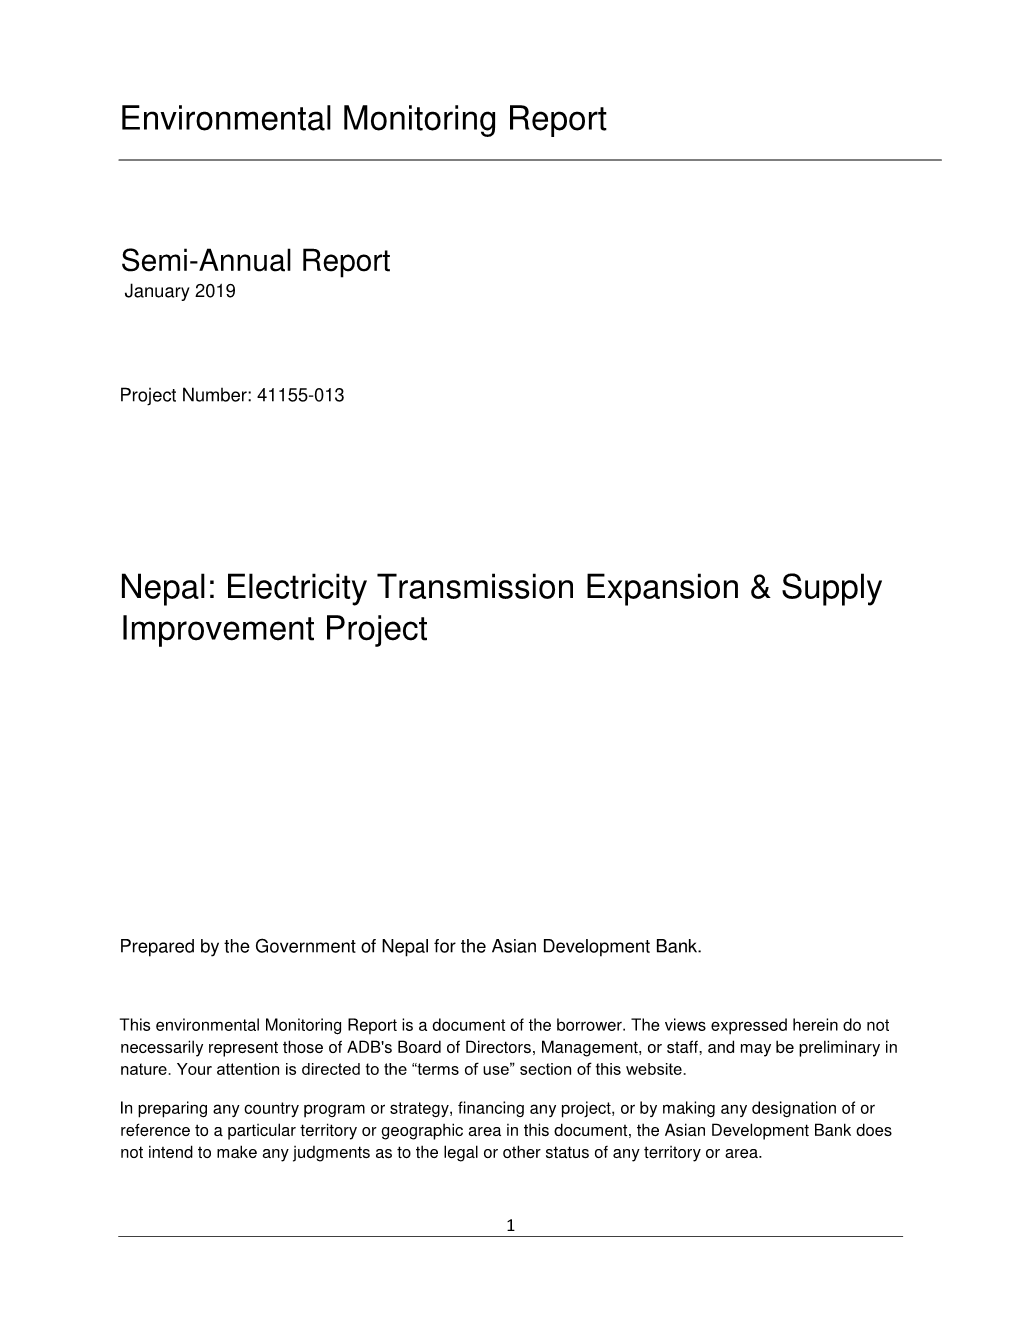 41155-013: Electricity Transmission Expansion and Supply